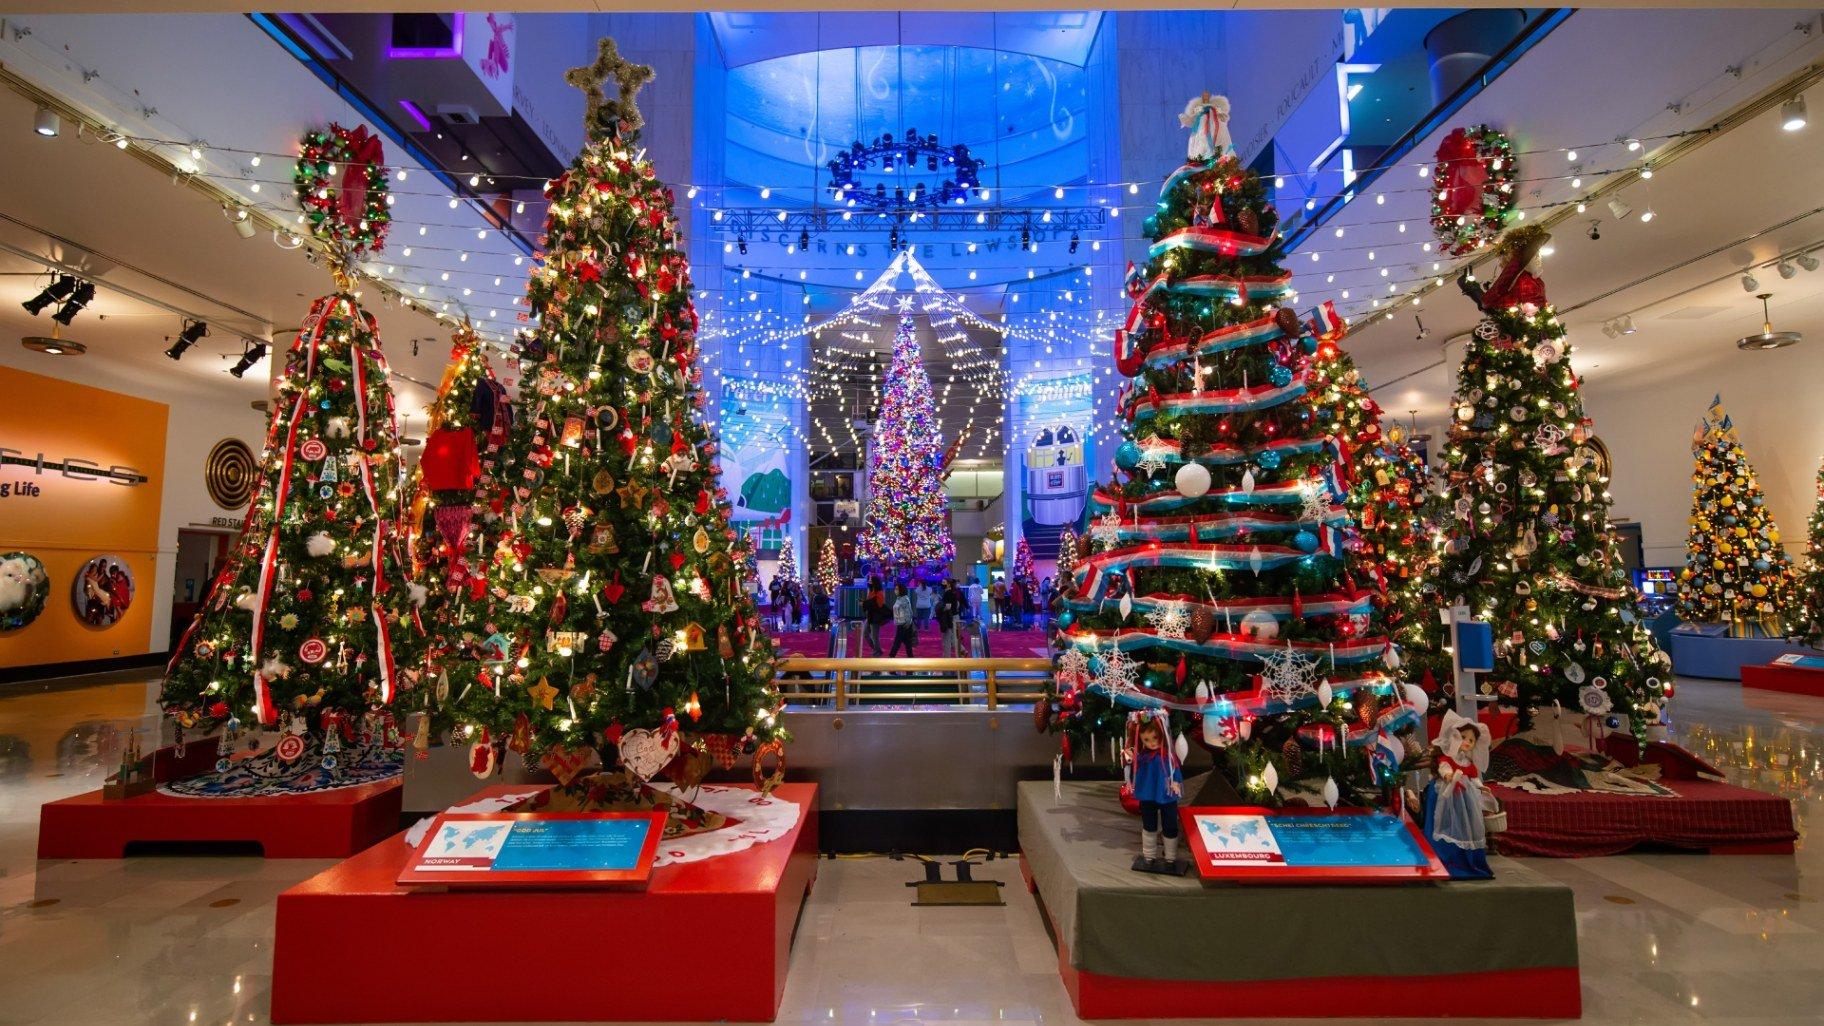 The annual “Christmas Around the World” exhibit at Museum of Science and Industry. (Credit: Heidi Peters / Museum of Science and Industry, Chicago)